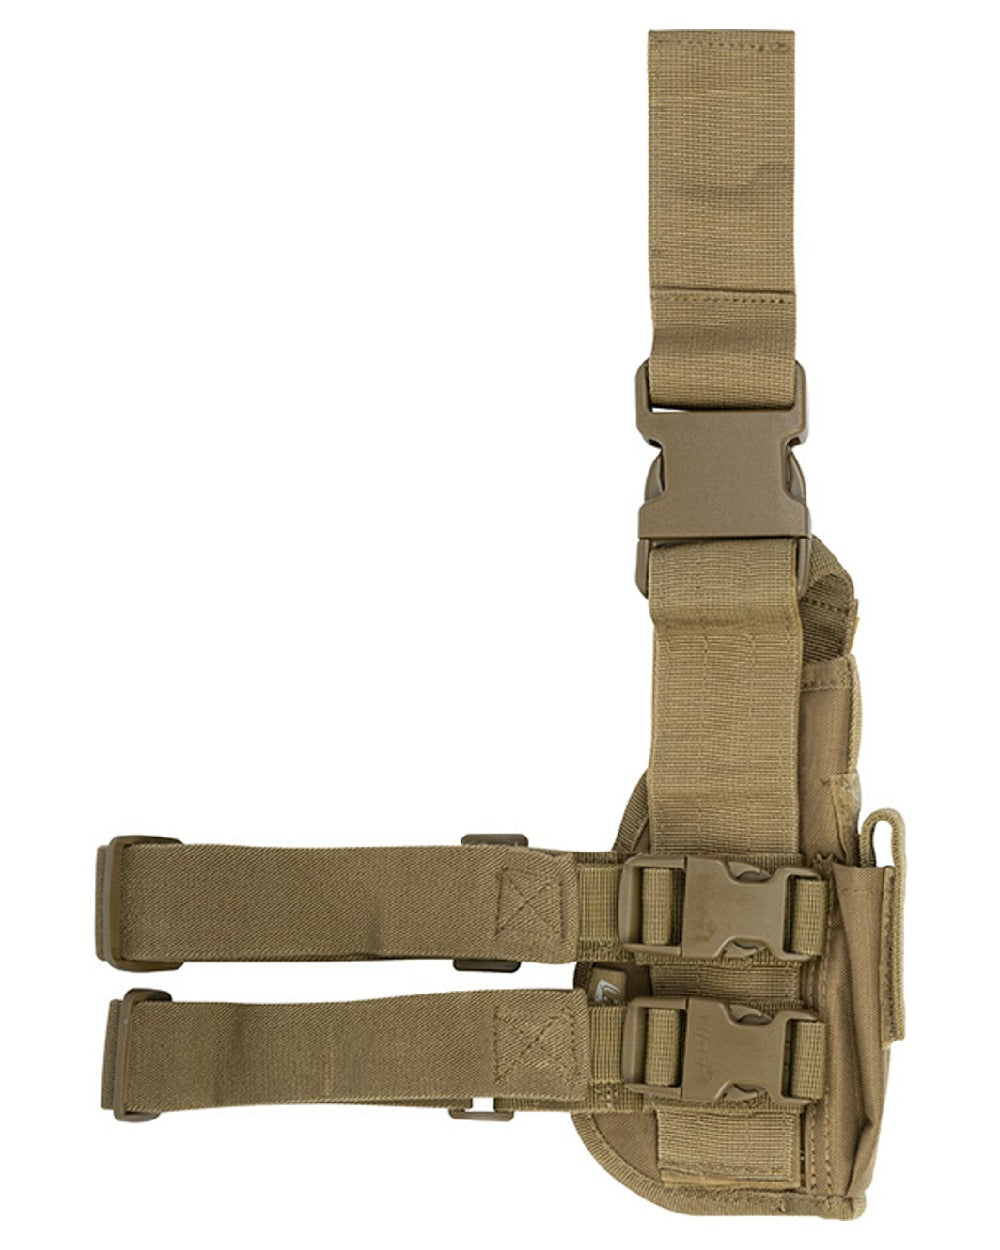 Viper Tactical Leg Holster Left Handed in Coyote 